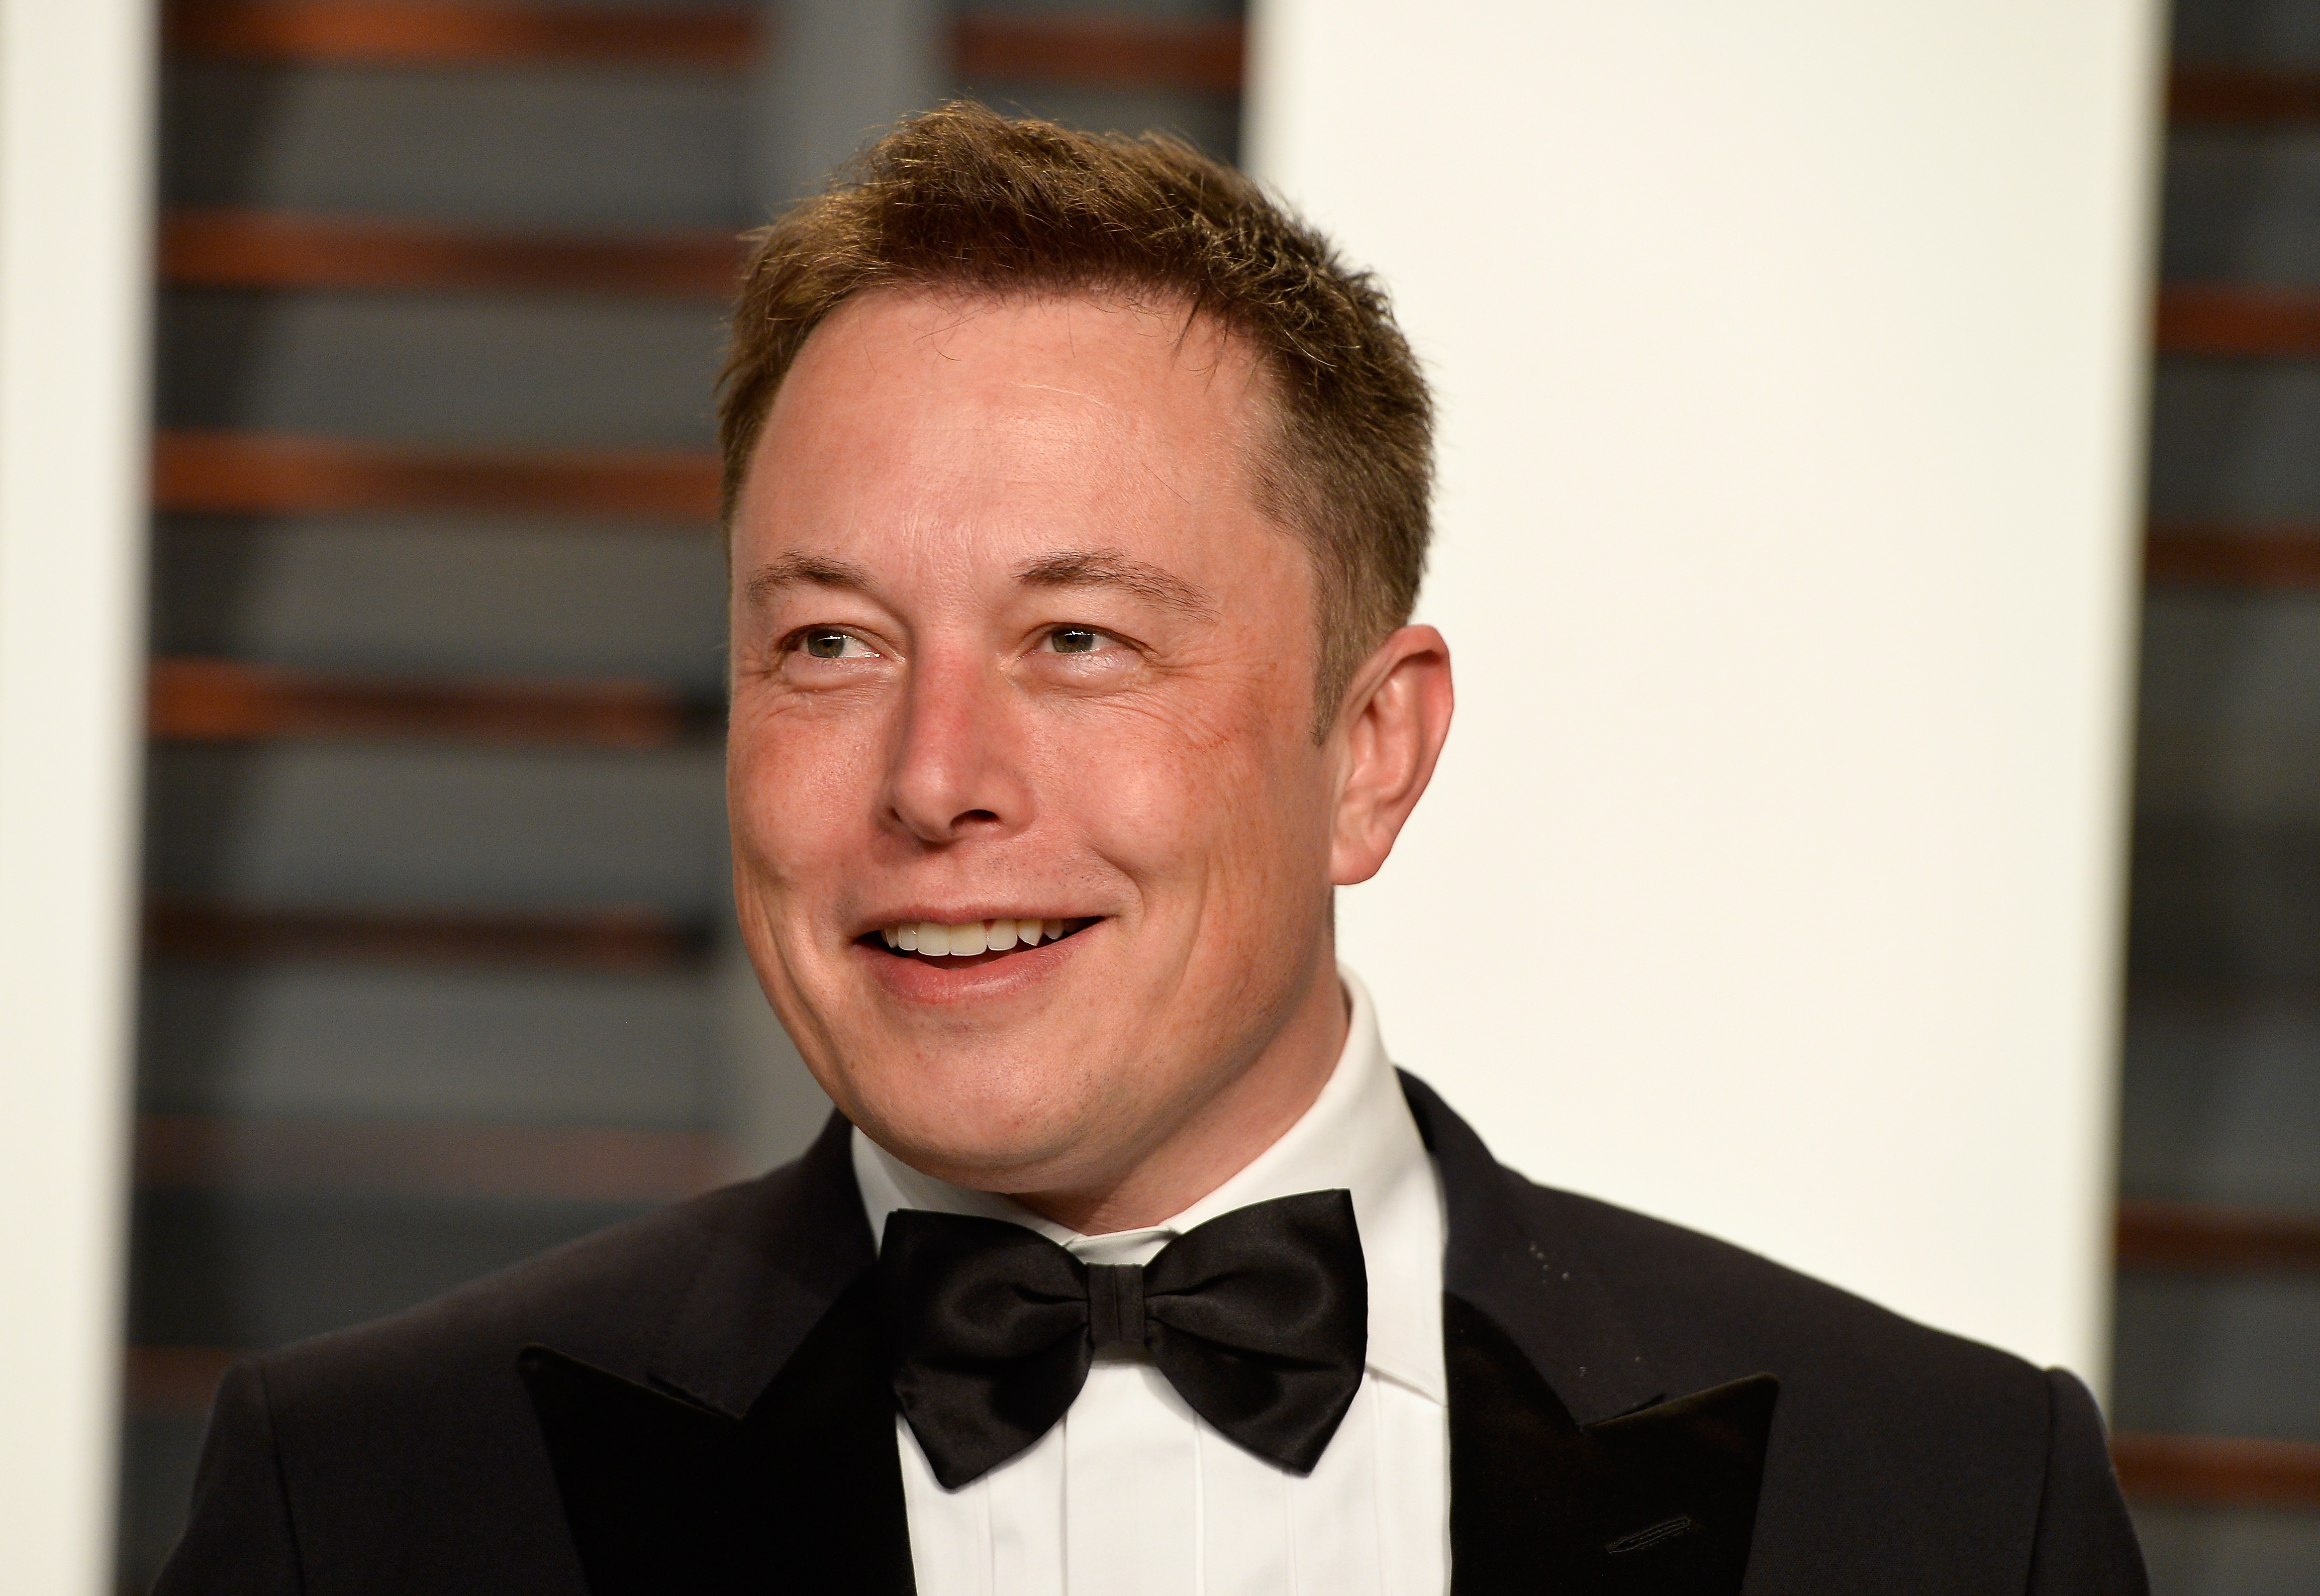 Elon Musk attends the 2015 Vanity Fair Oscar Party hosted by Graydon Carter at Wallis Annenberg Center for the Performing Arts on February 22, 2015, in Beverly Hills, California. | Source: Getty Images